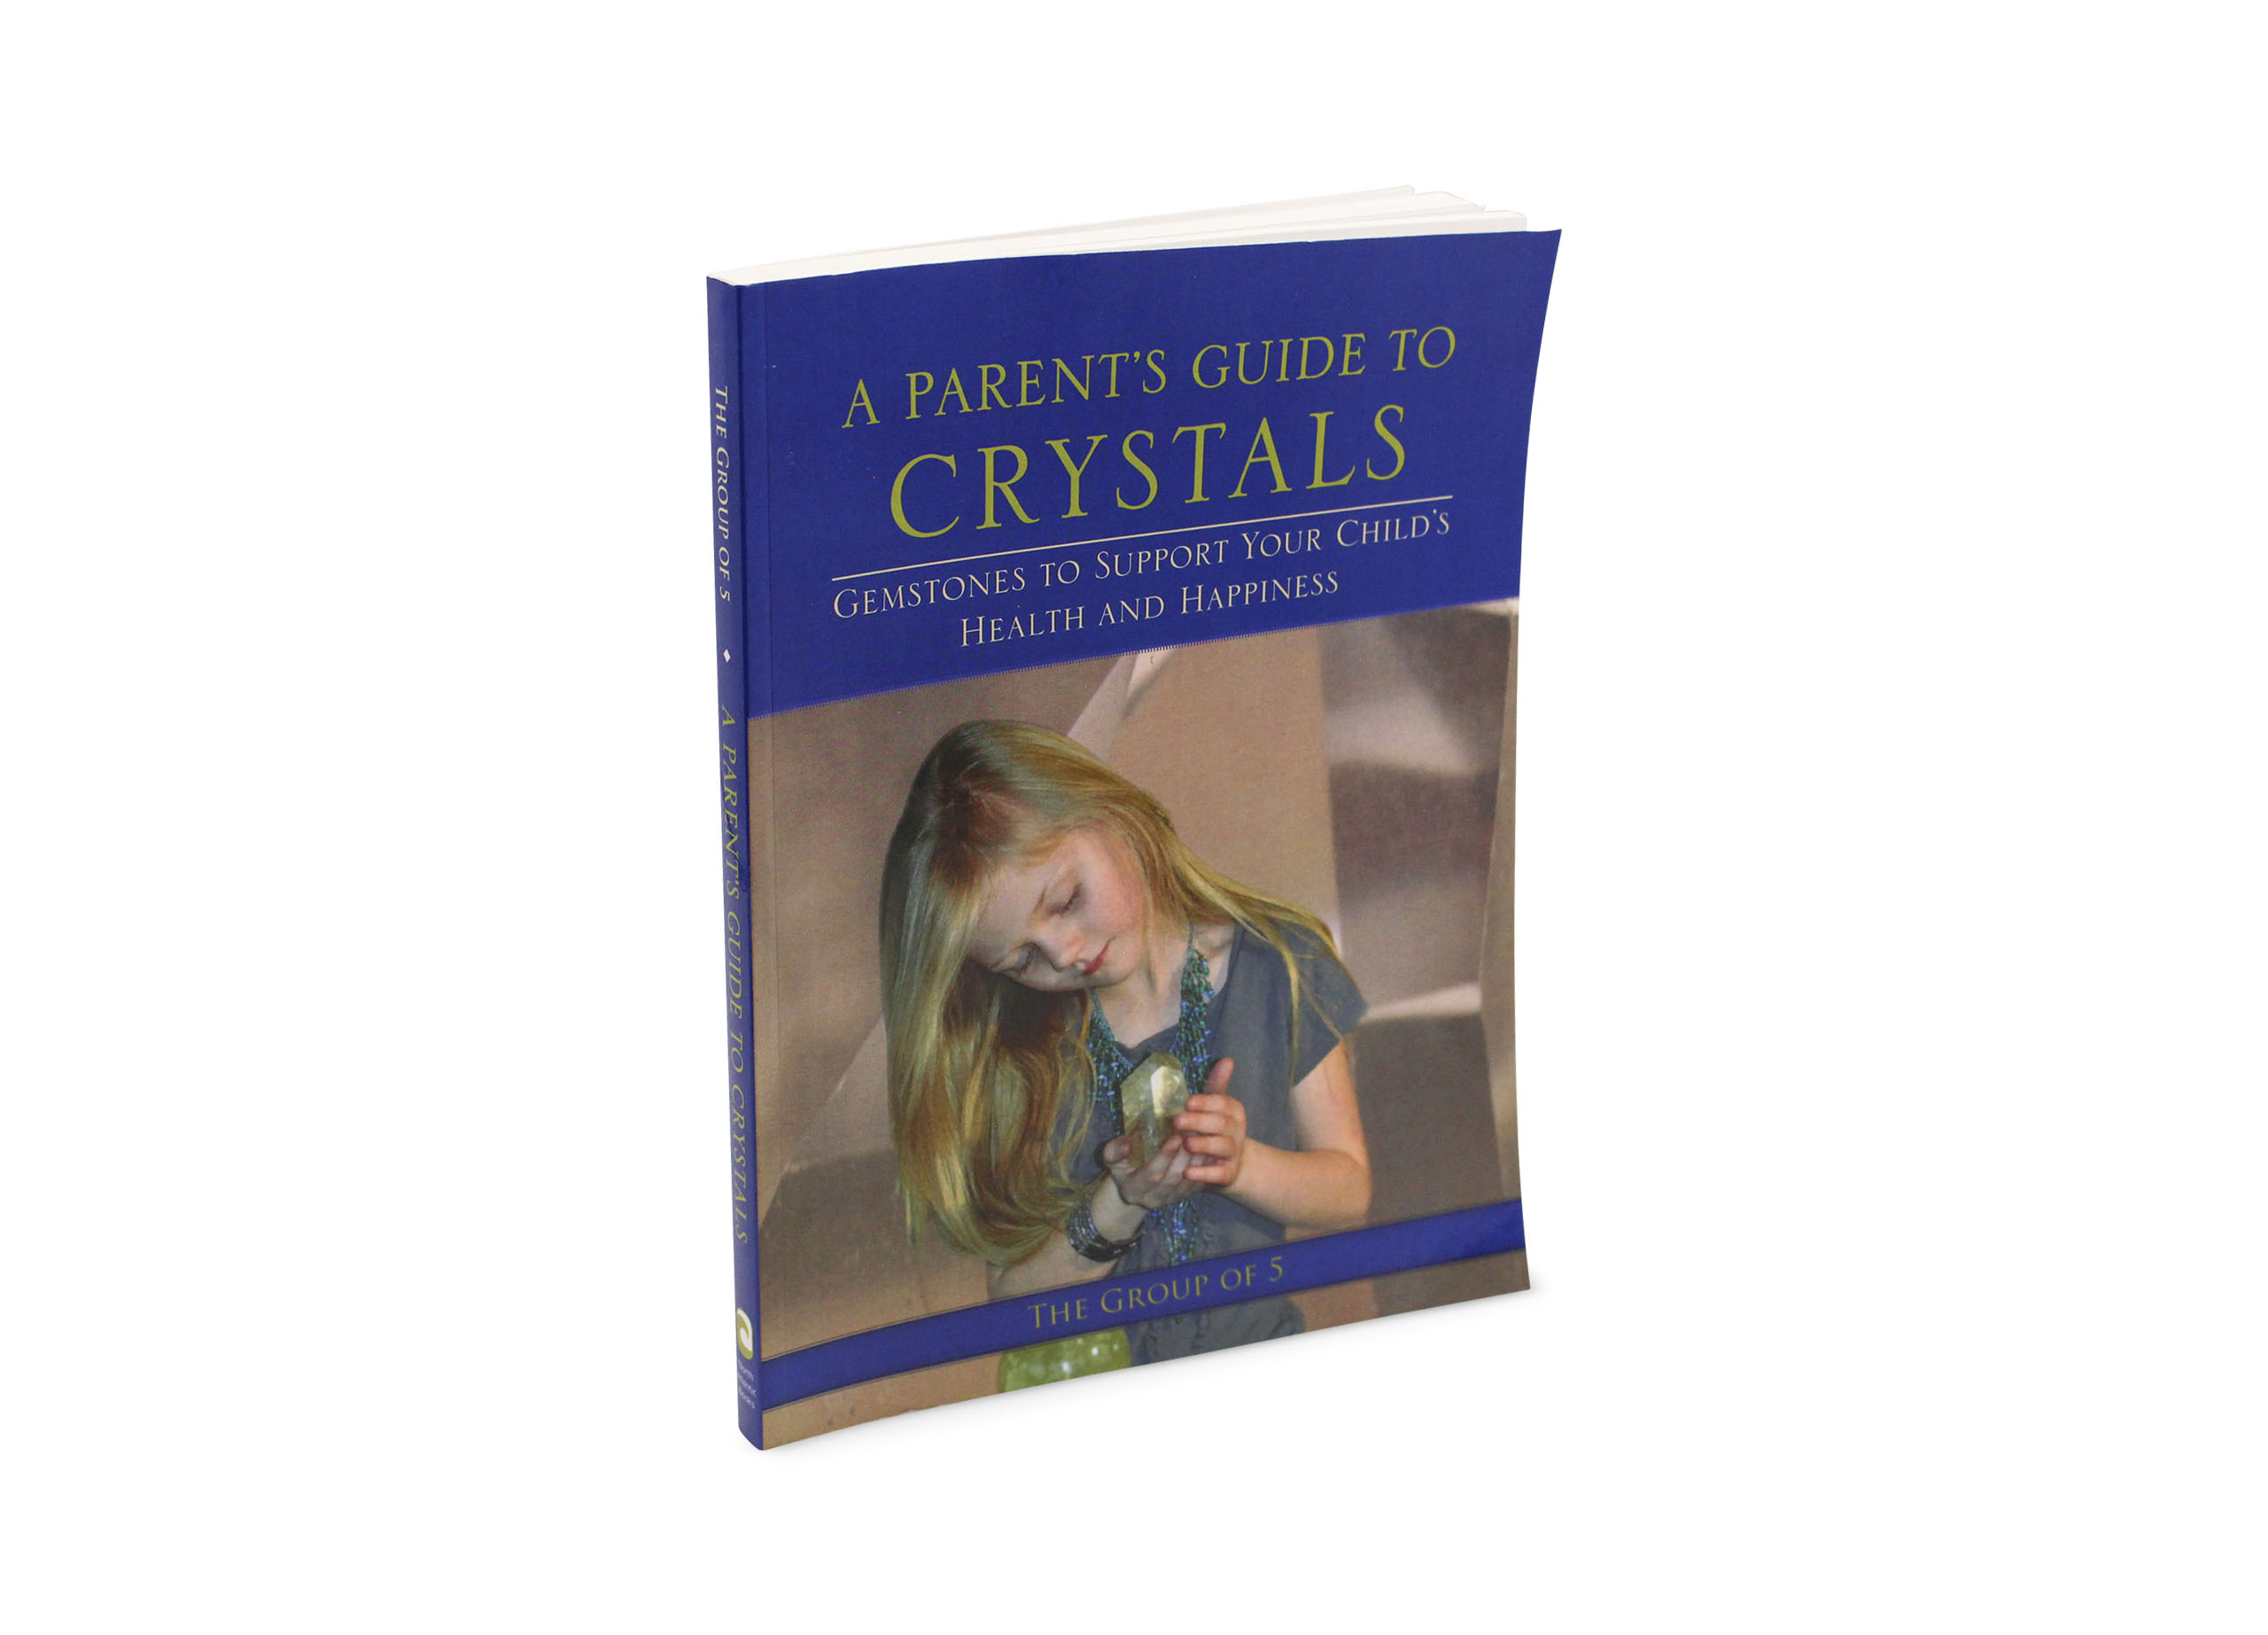 A Parent’s Guide to Crystals - Crystal Dreams